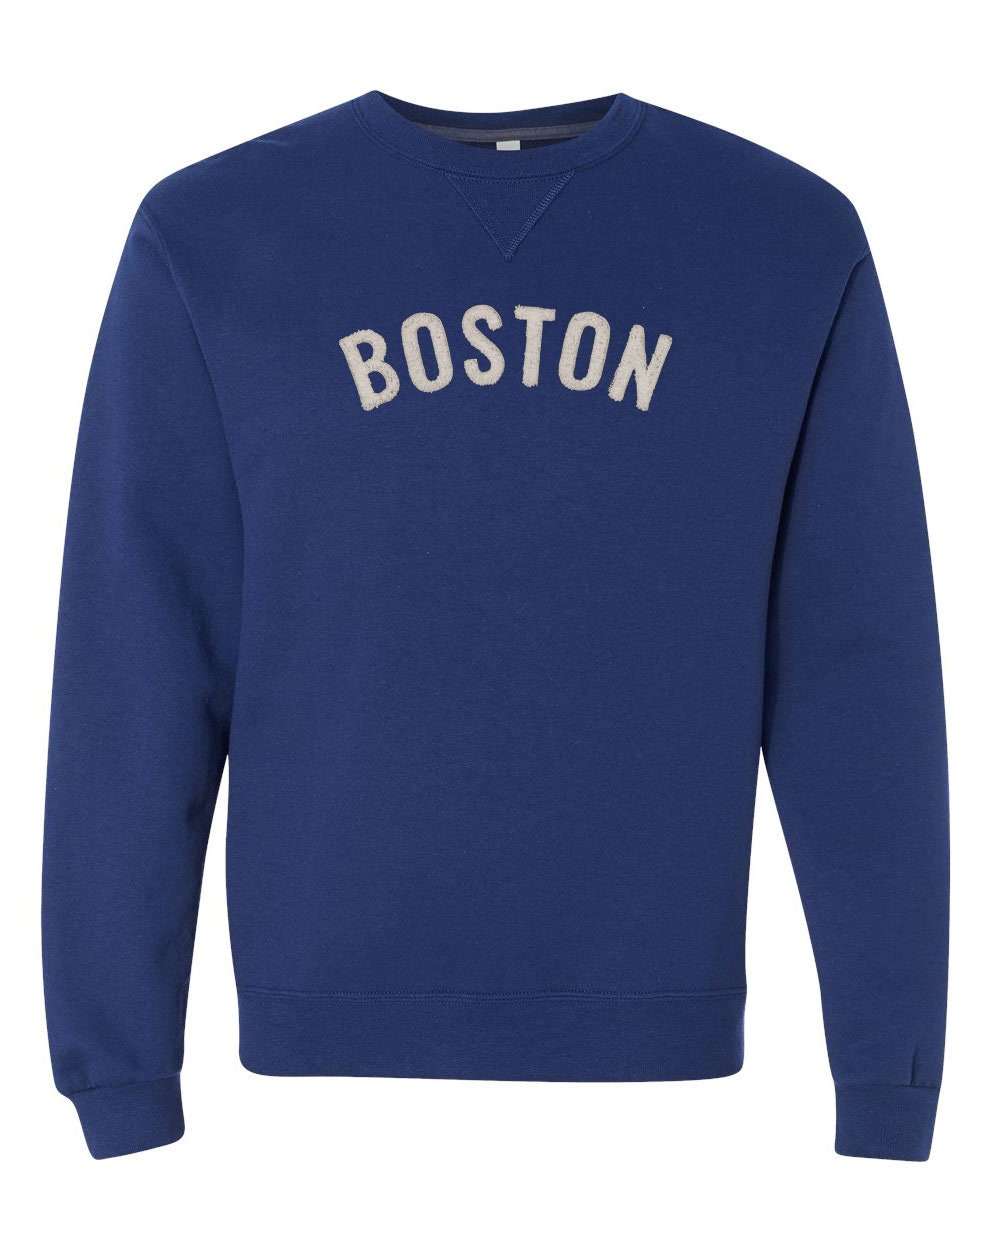 Boston Crew Neck Sweatshirt SF72R with Chenille Letters in | Etsy